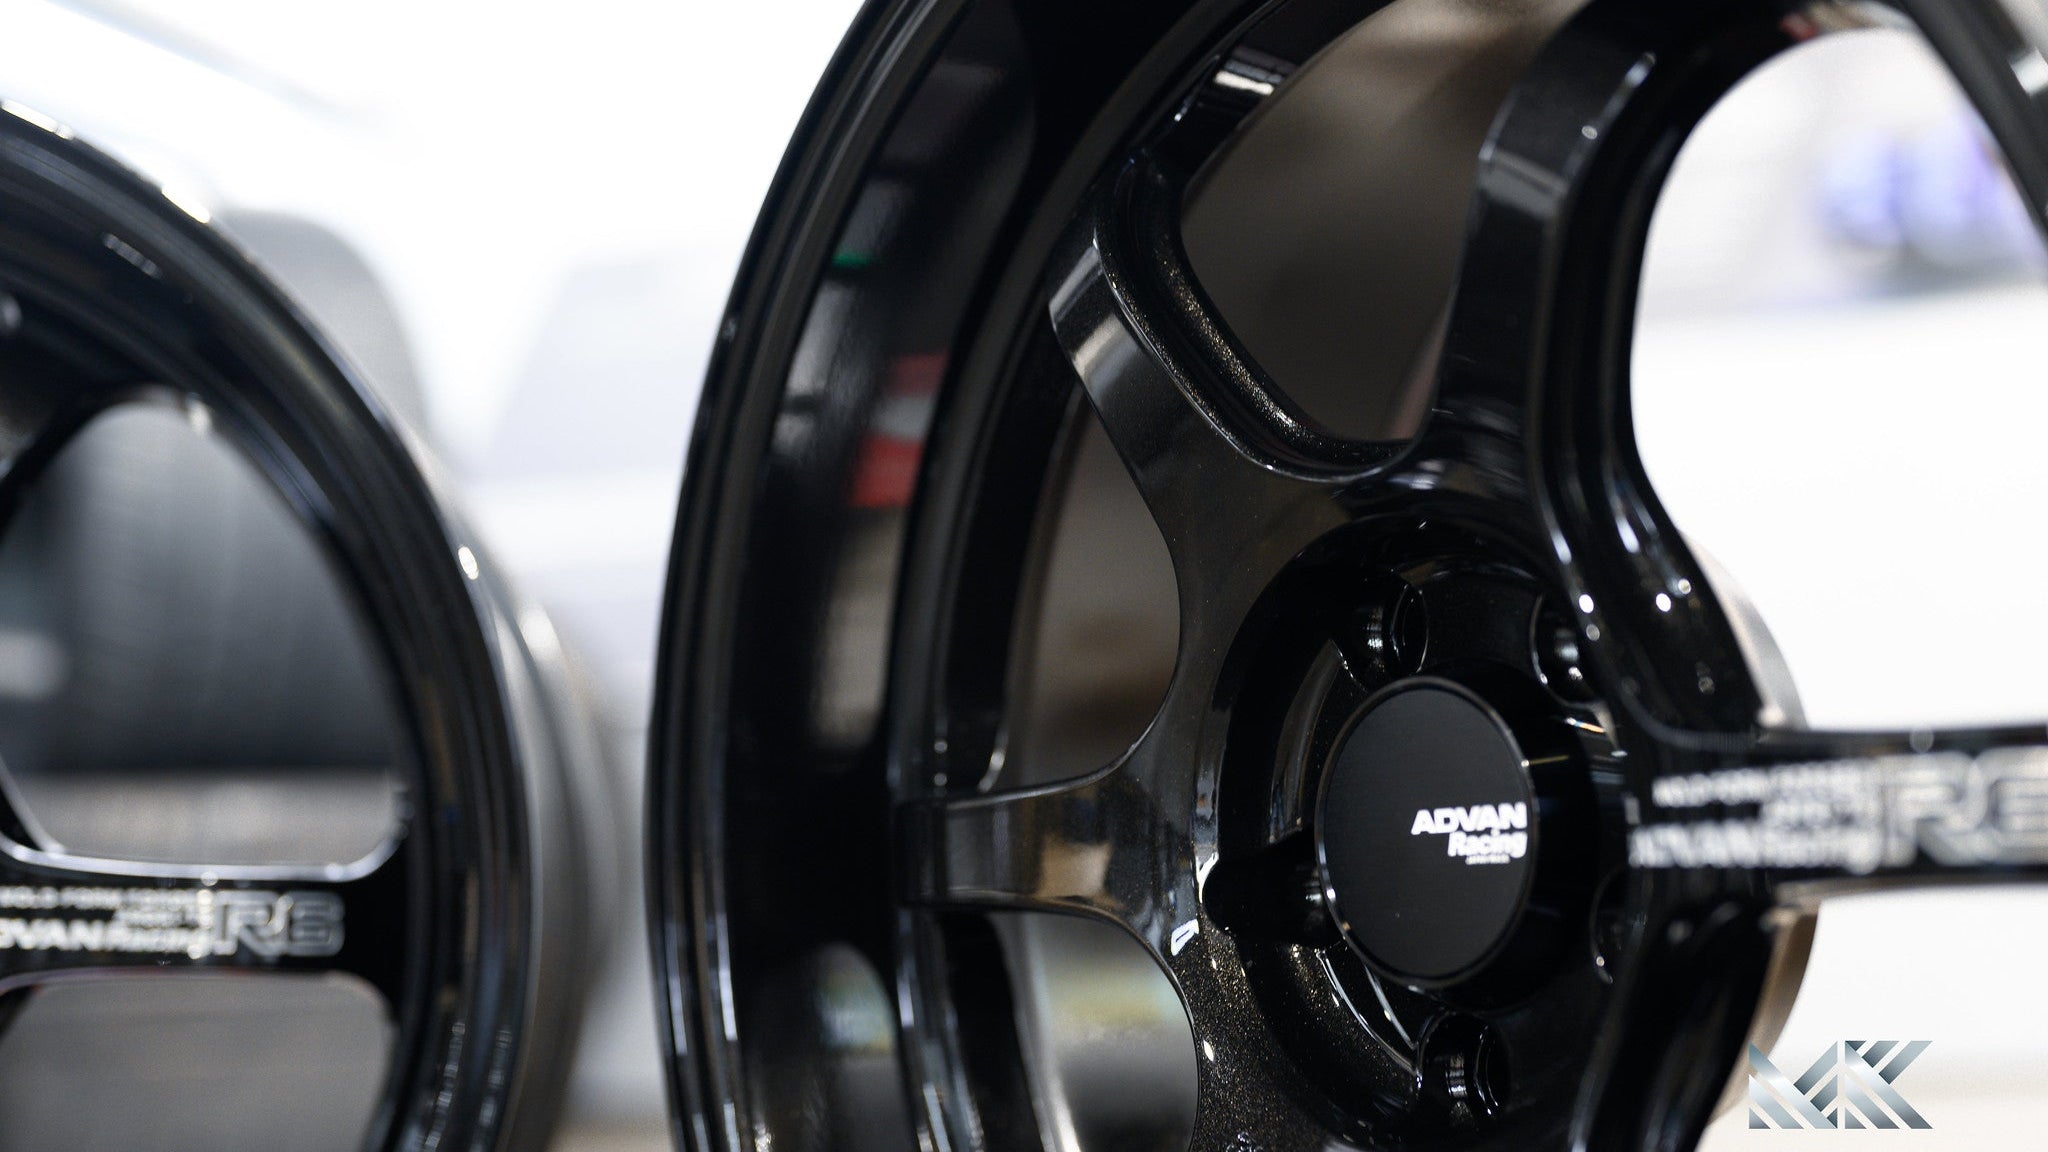 Advan Racing R6 - Premium Wheels from Advan Racing - From just $4890.00! Shop now at MK MOTORSPORTS